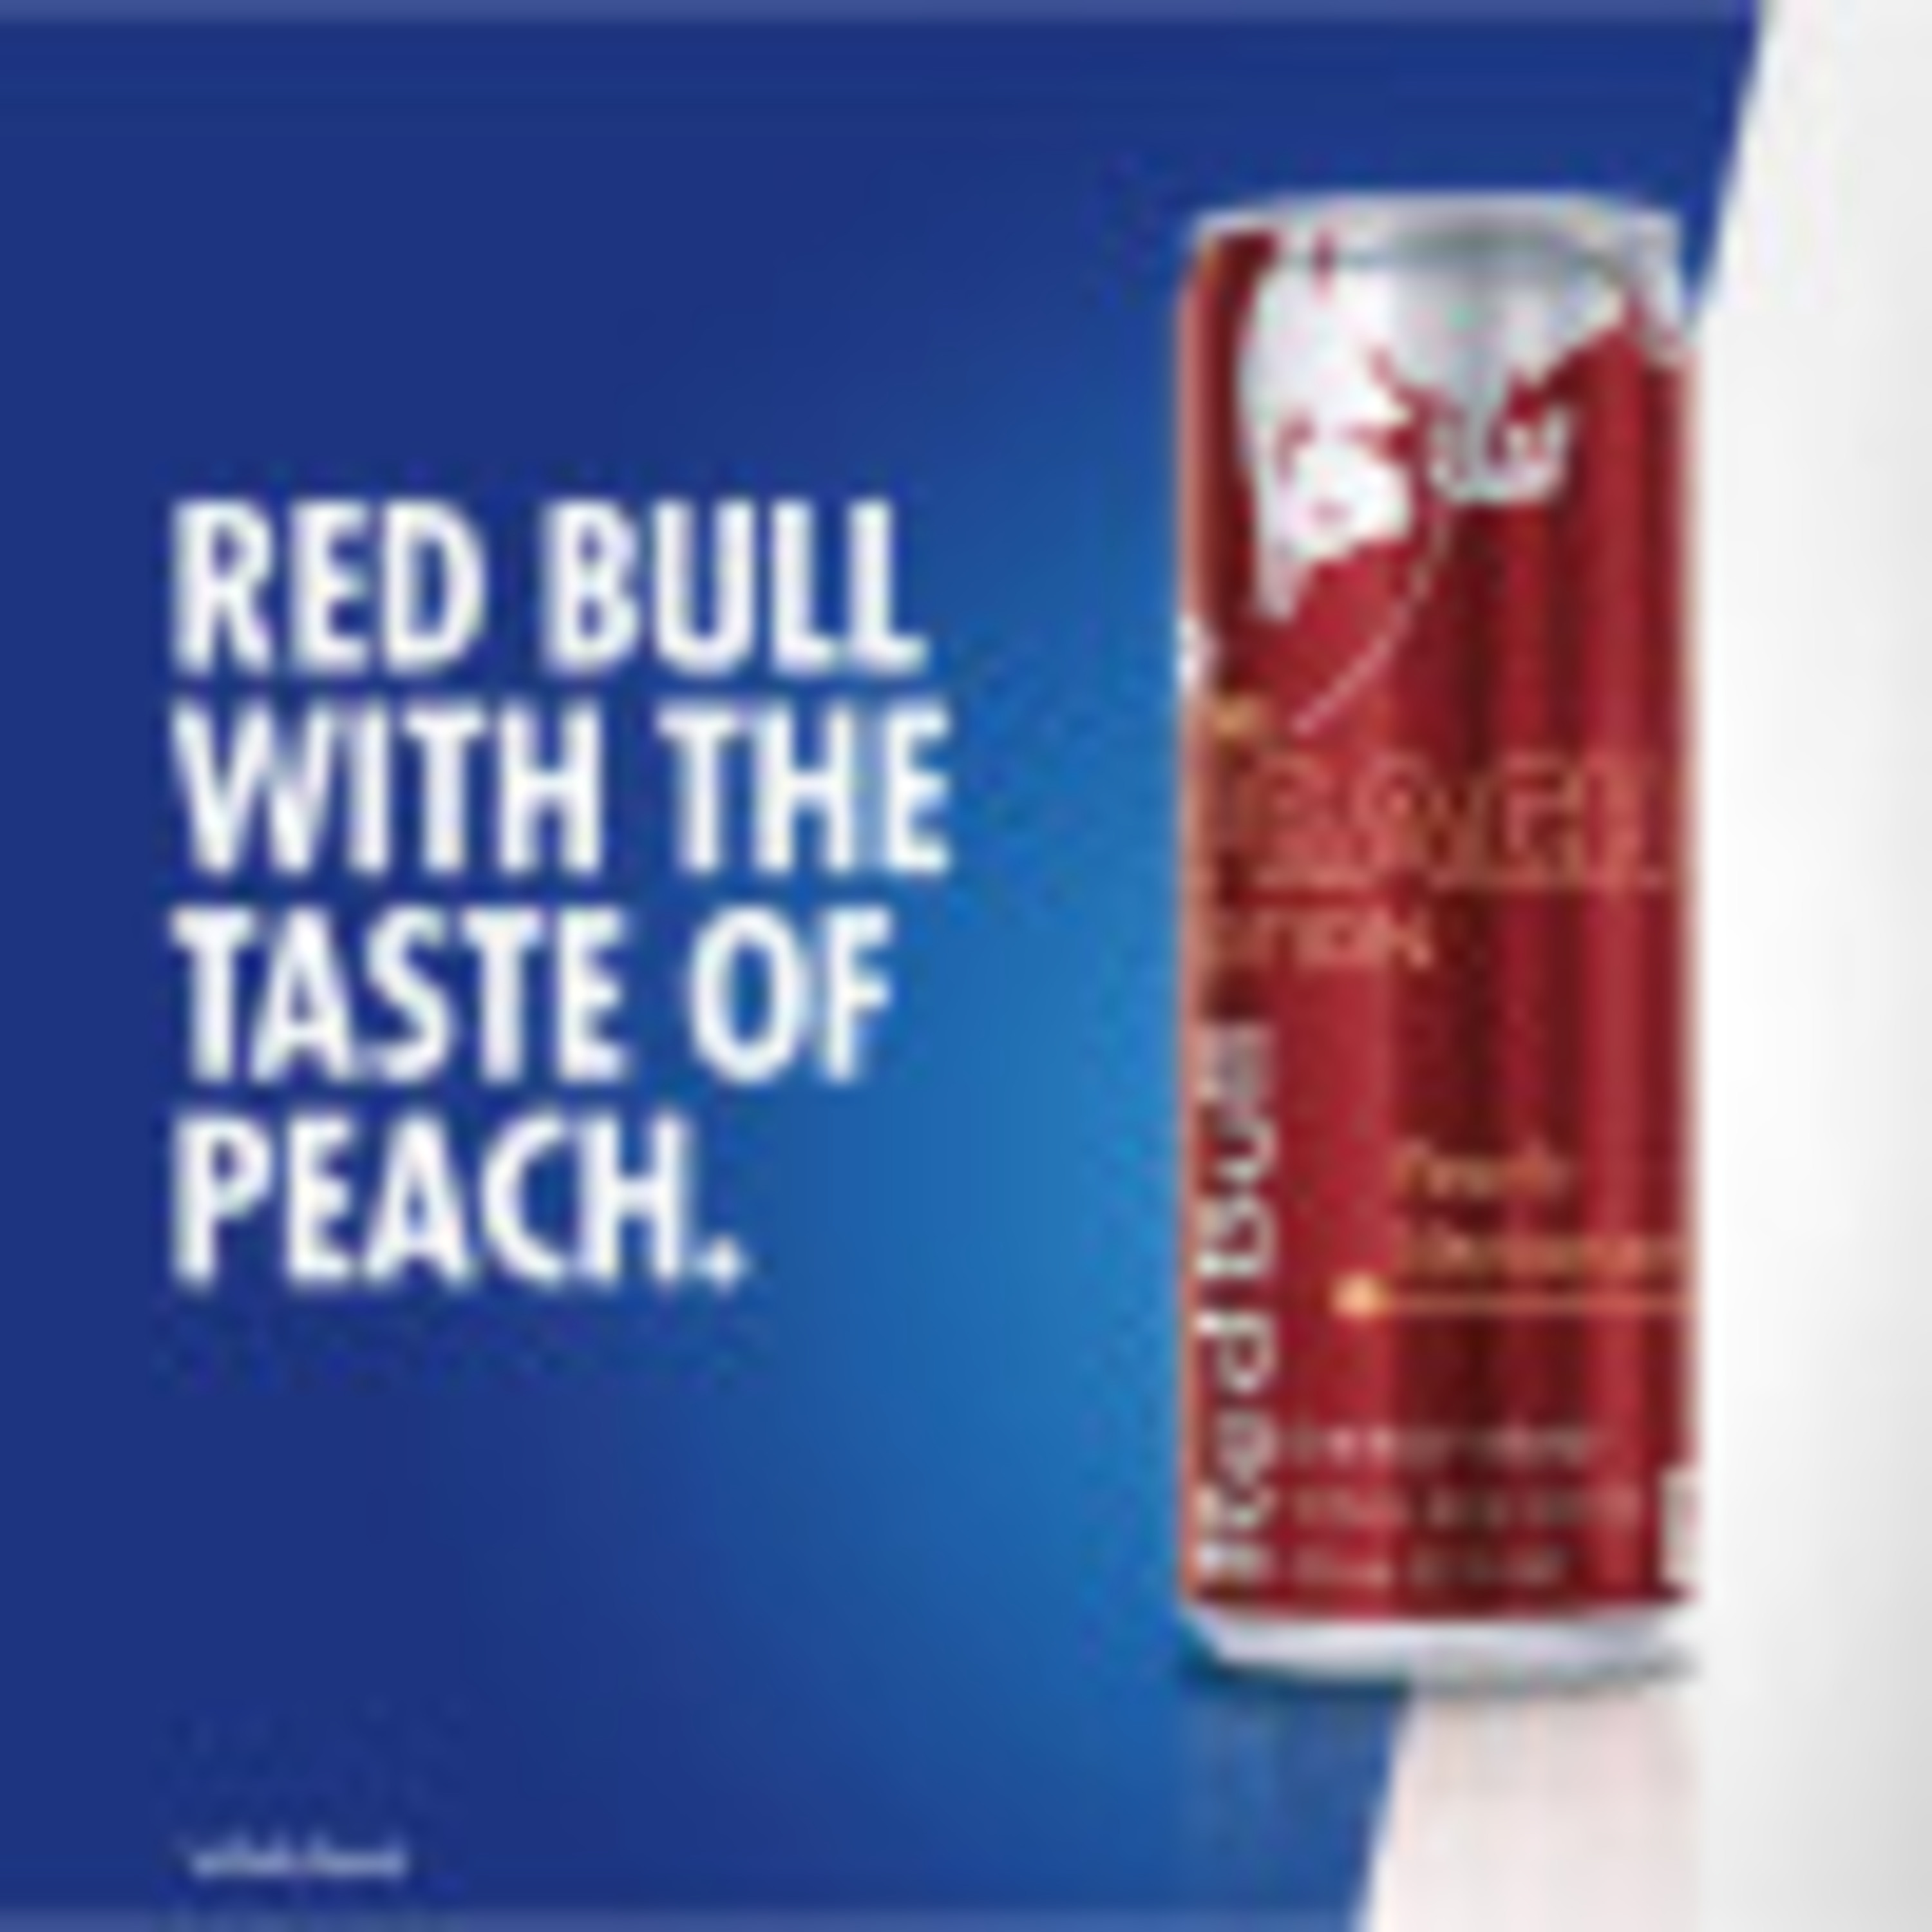 Red Bull Peach Edition Energy Drink, 12 fl oz, Pack of 4 Cans - image 3 of 8